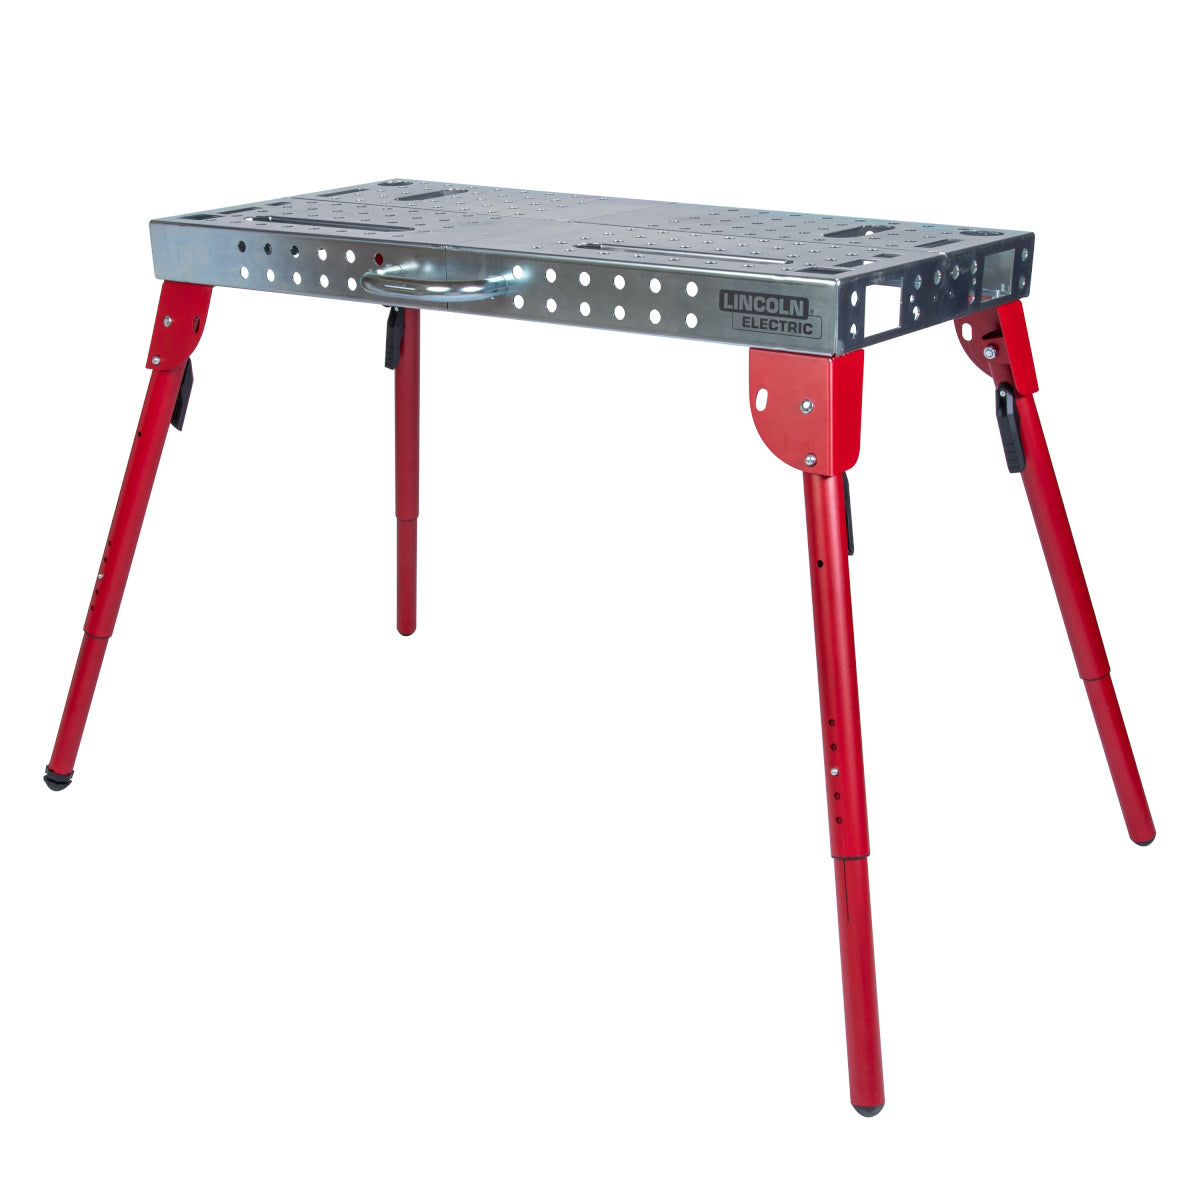 Lincoln Portable Welding Table and Workbench (K5334-1)